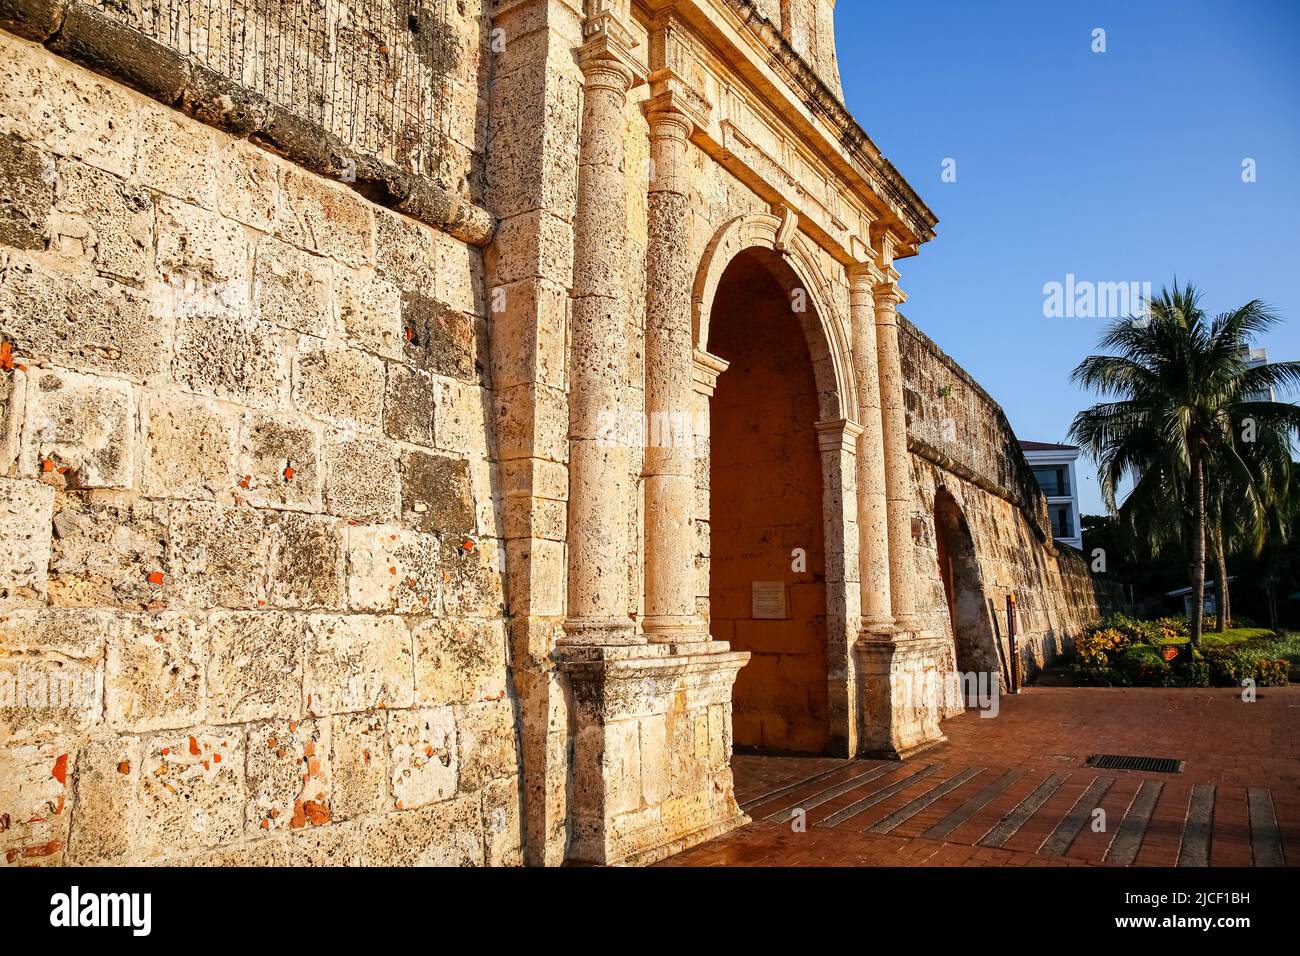 View to an ancient wall and entrance gate in sunshine, palm tree in background, Cartagena, Colombia, Unesco World Heritage Stock Photo